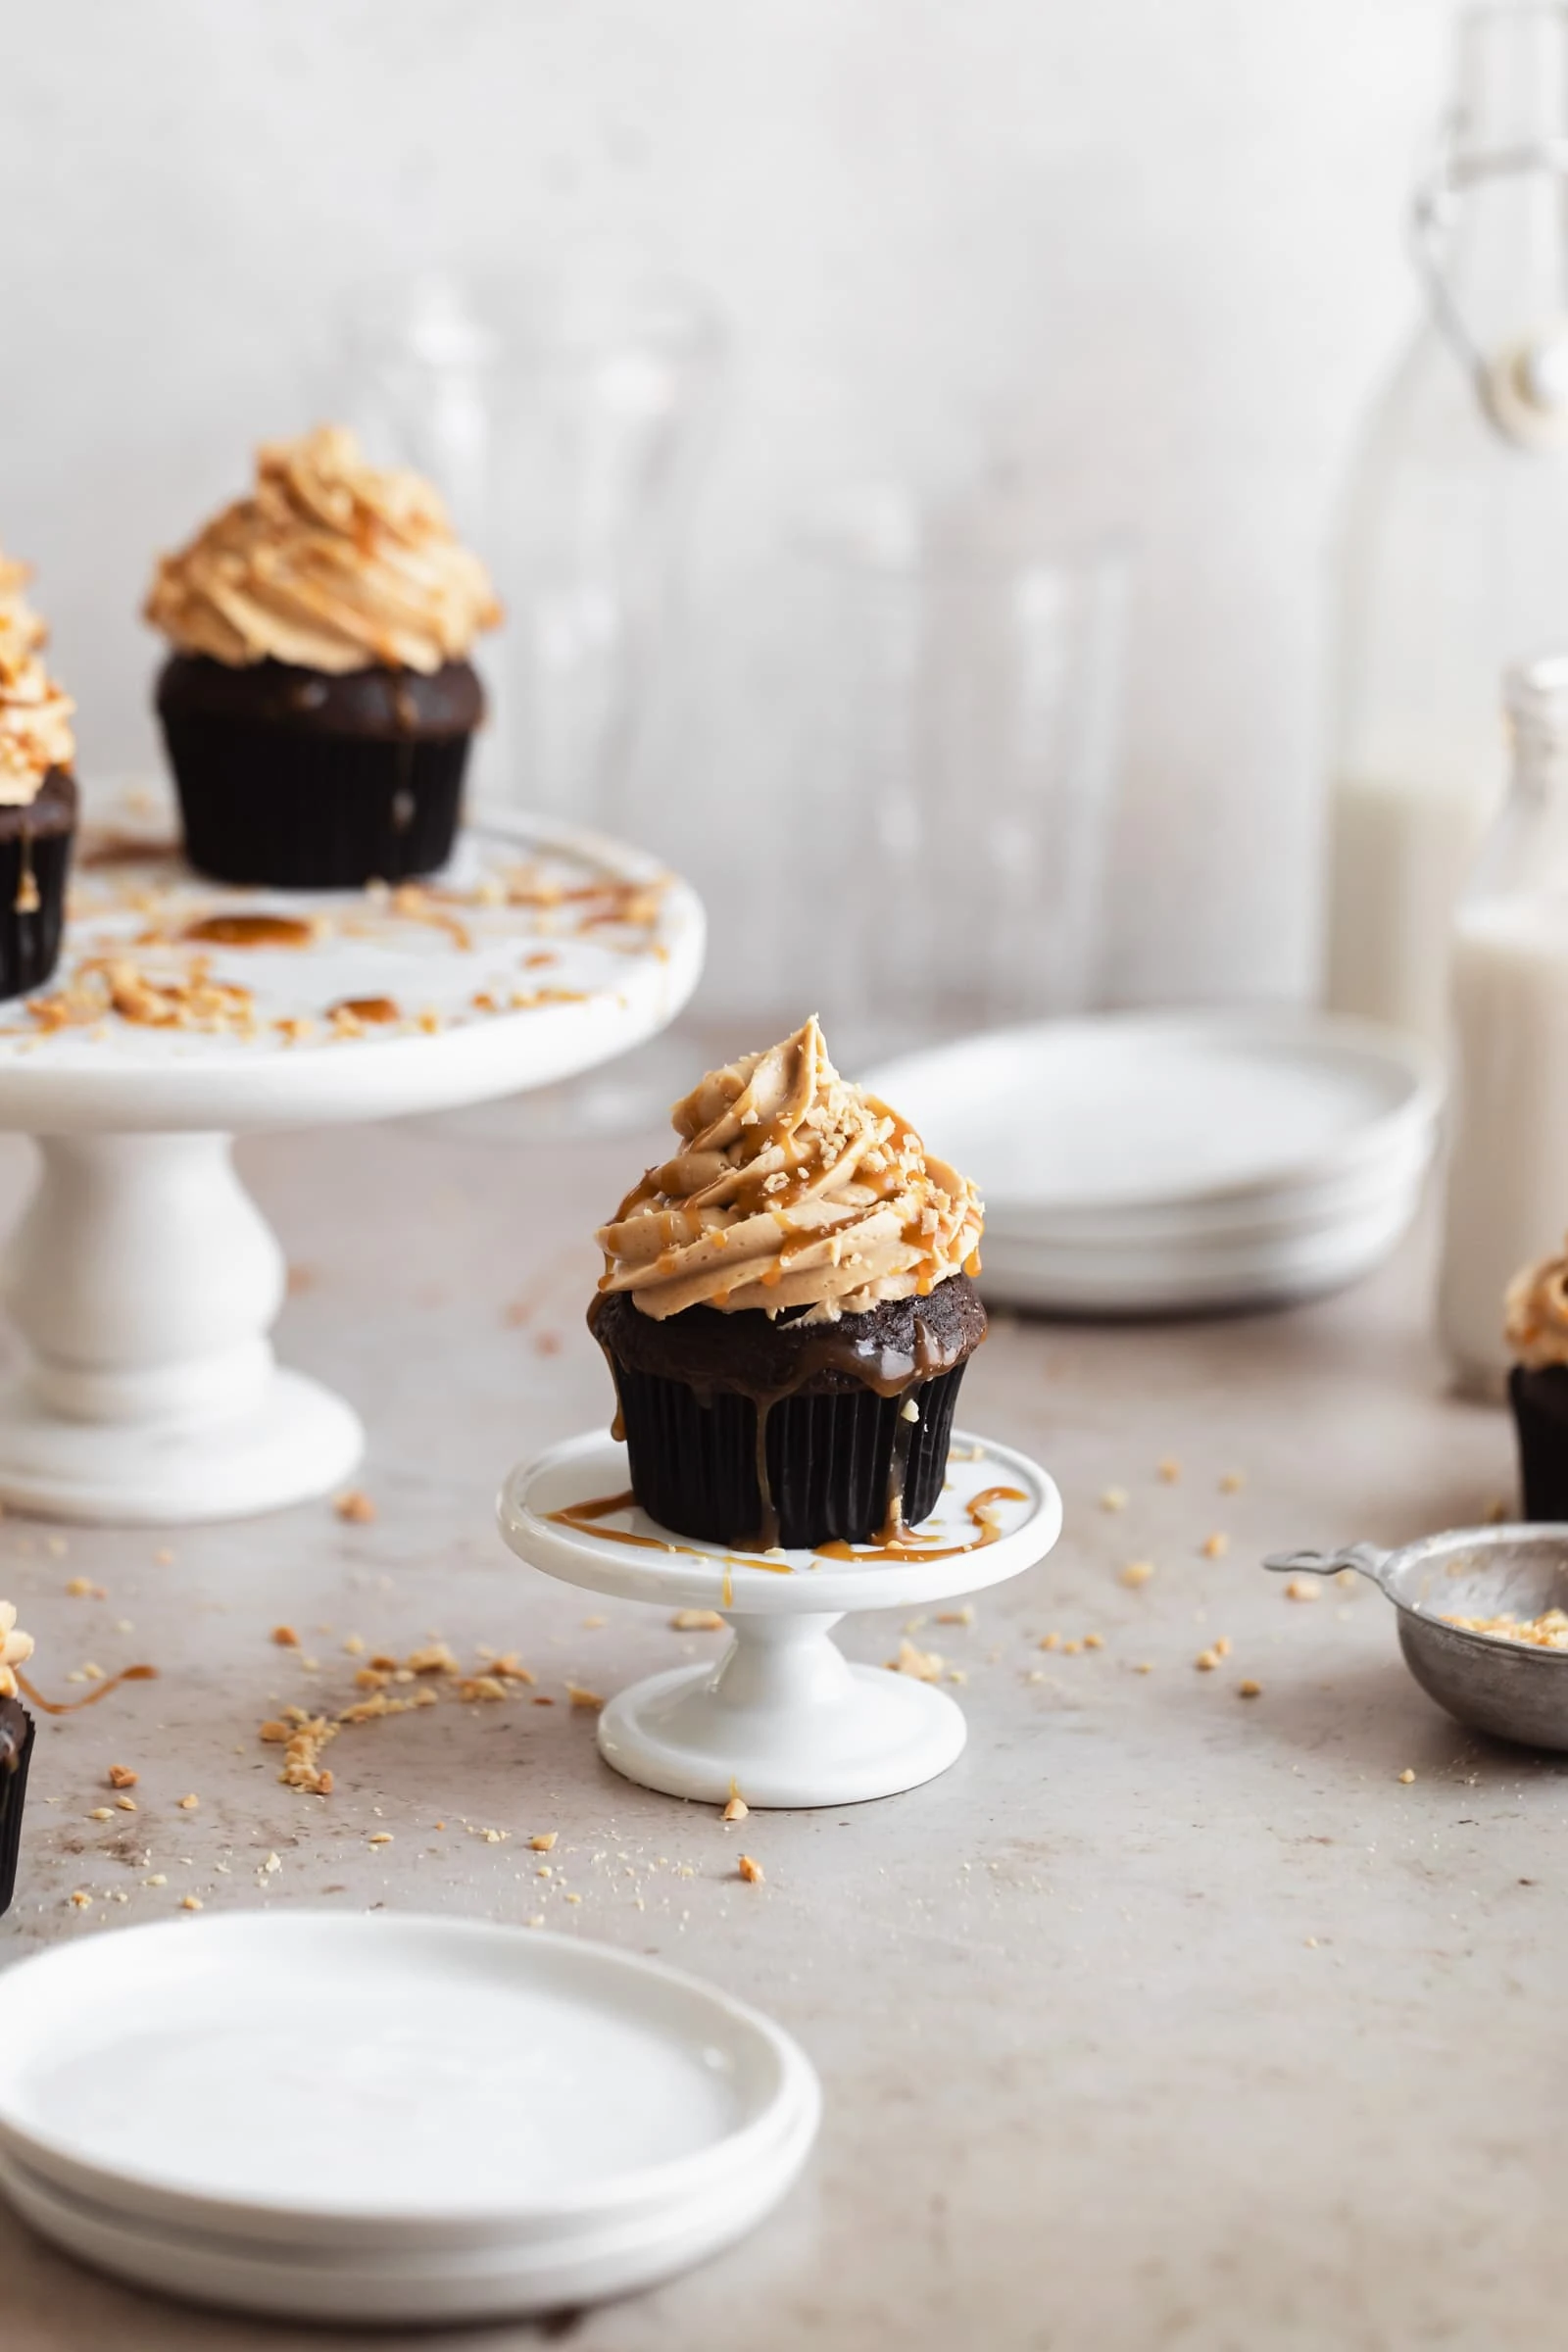 chocolate peanut butter cupcakes with caramel drizzle